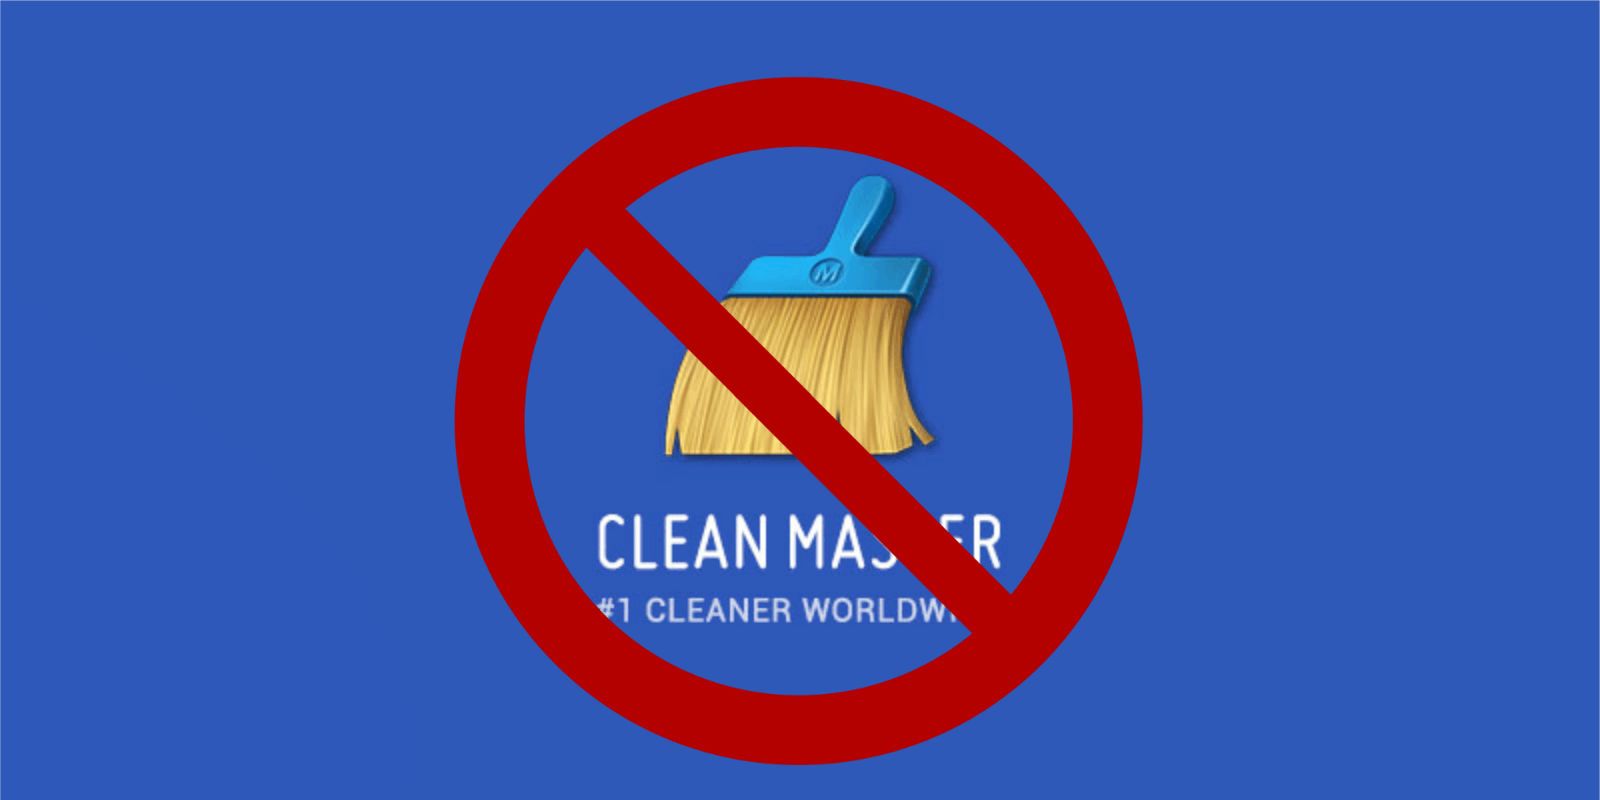 Clean Master Android App Might Be More Dangerous Than You Think